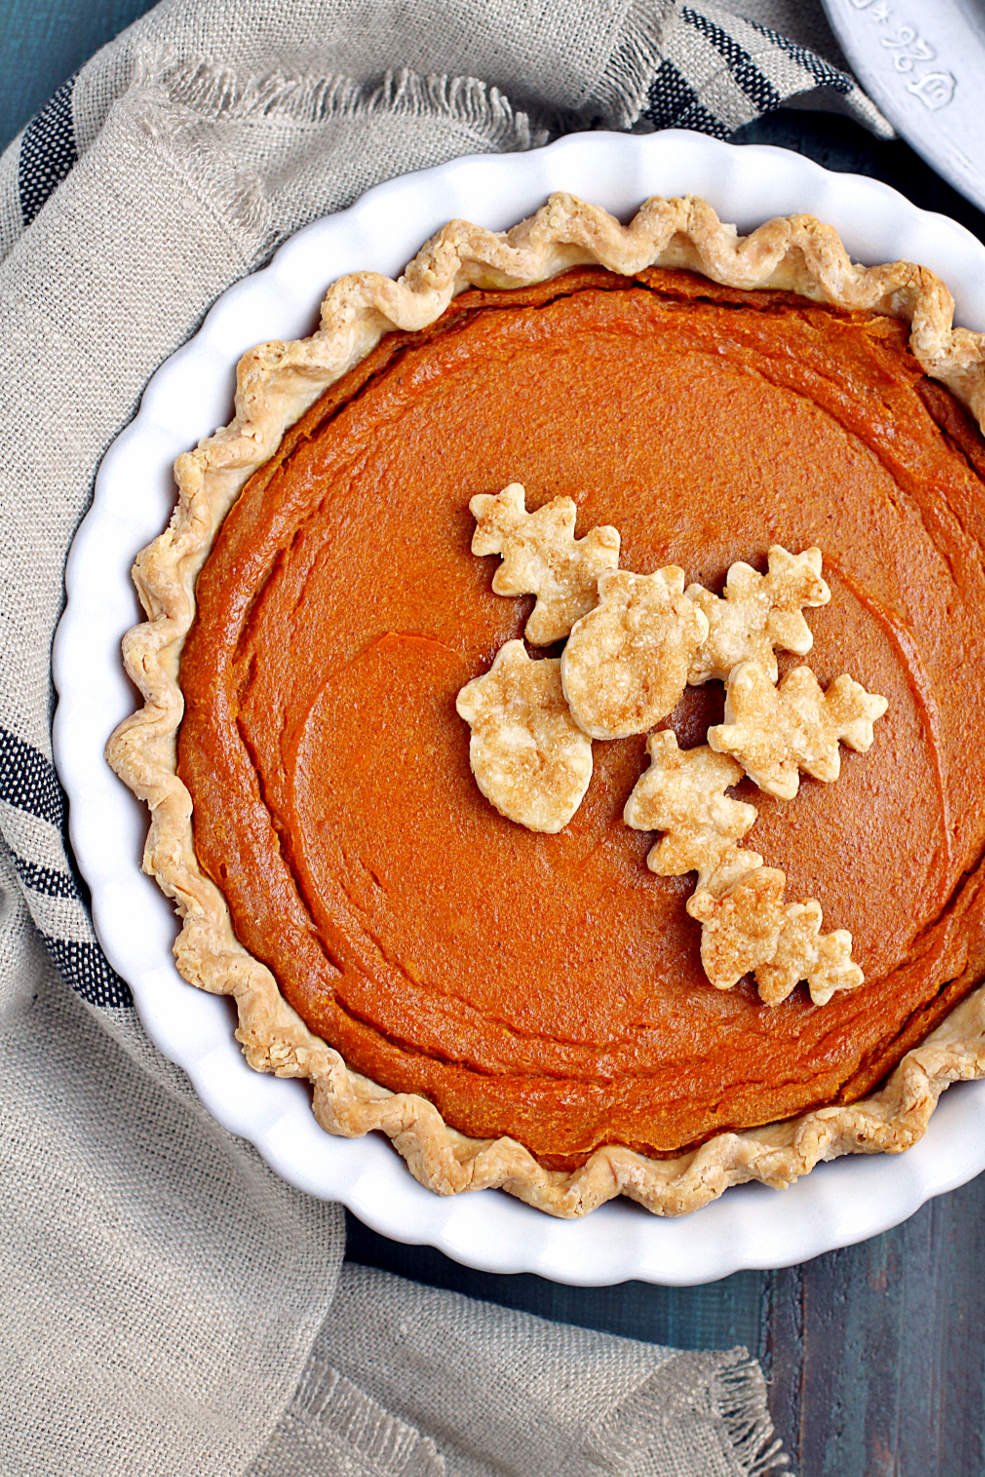 Vegan Pumpkin Pie with a Coconut Oil Crust - Two of a Kind